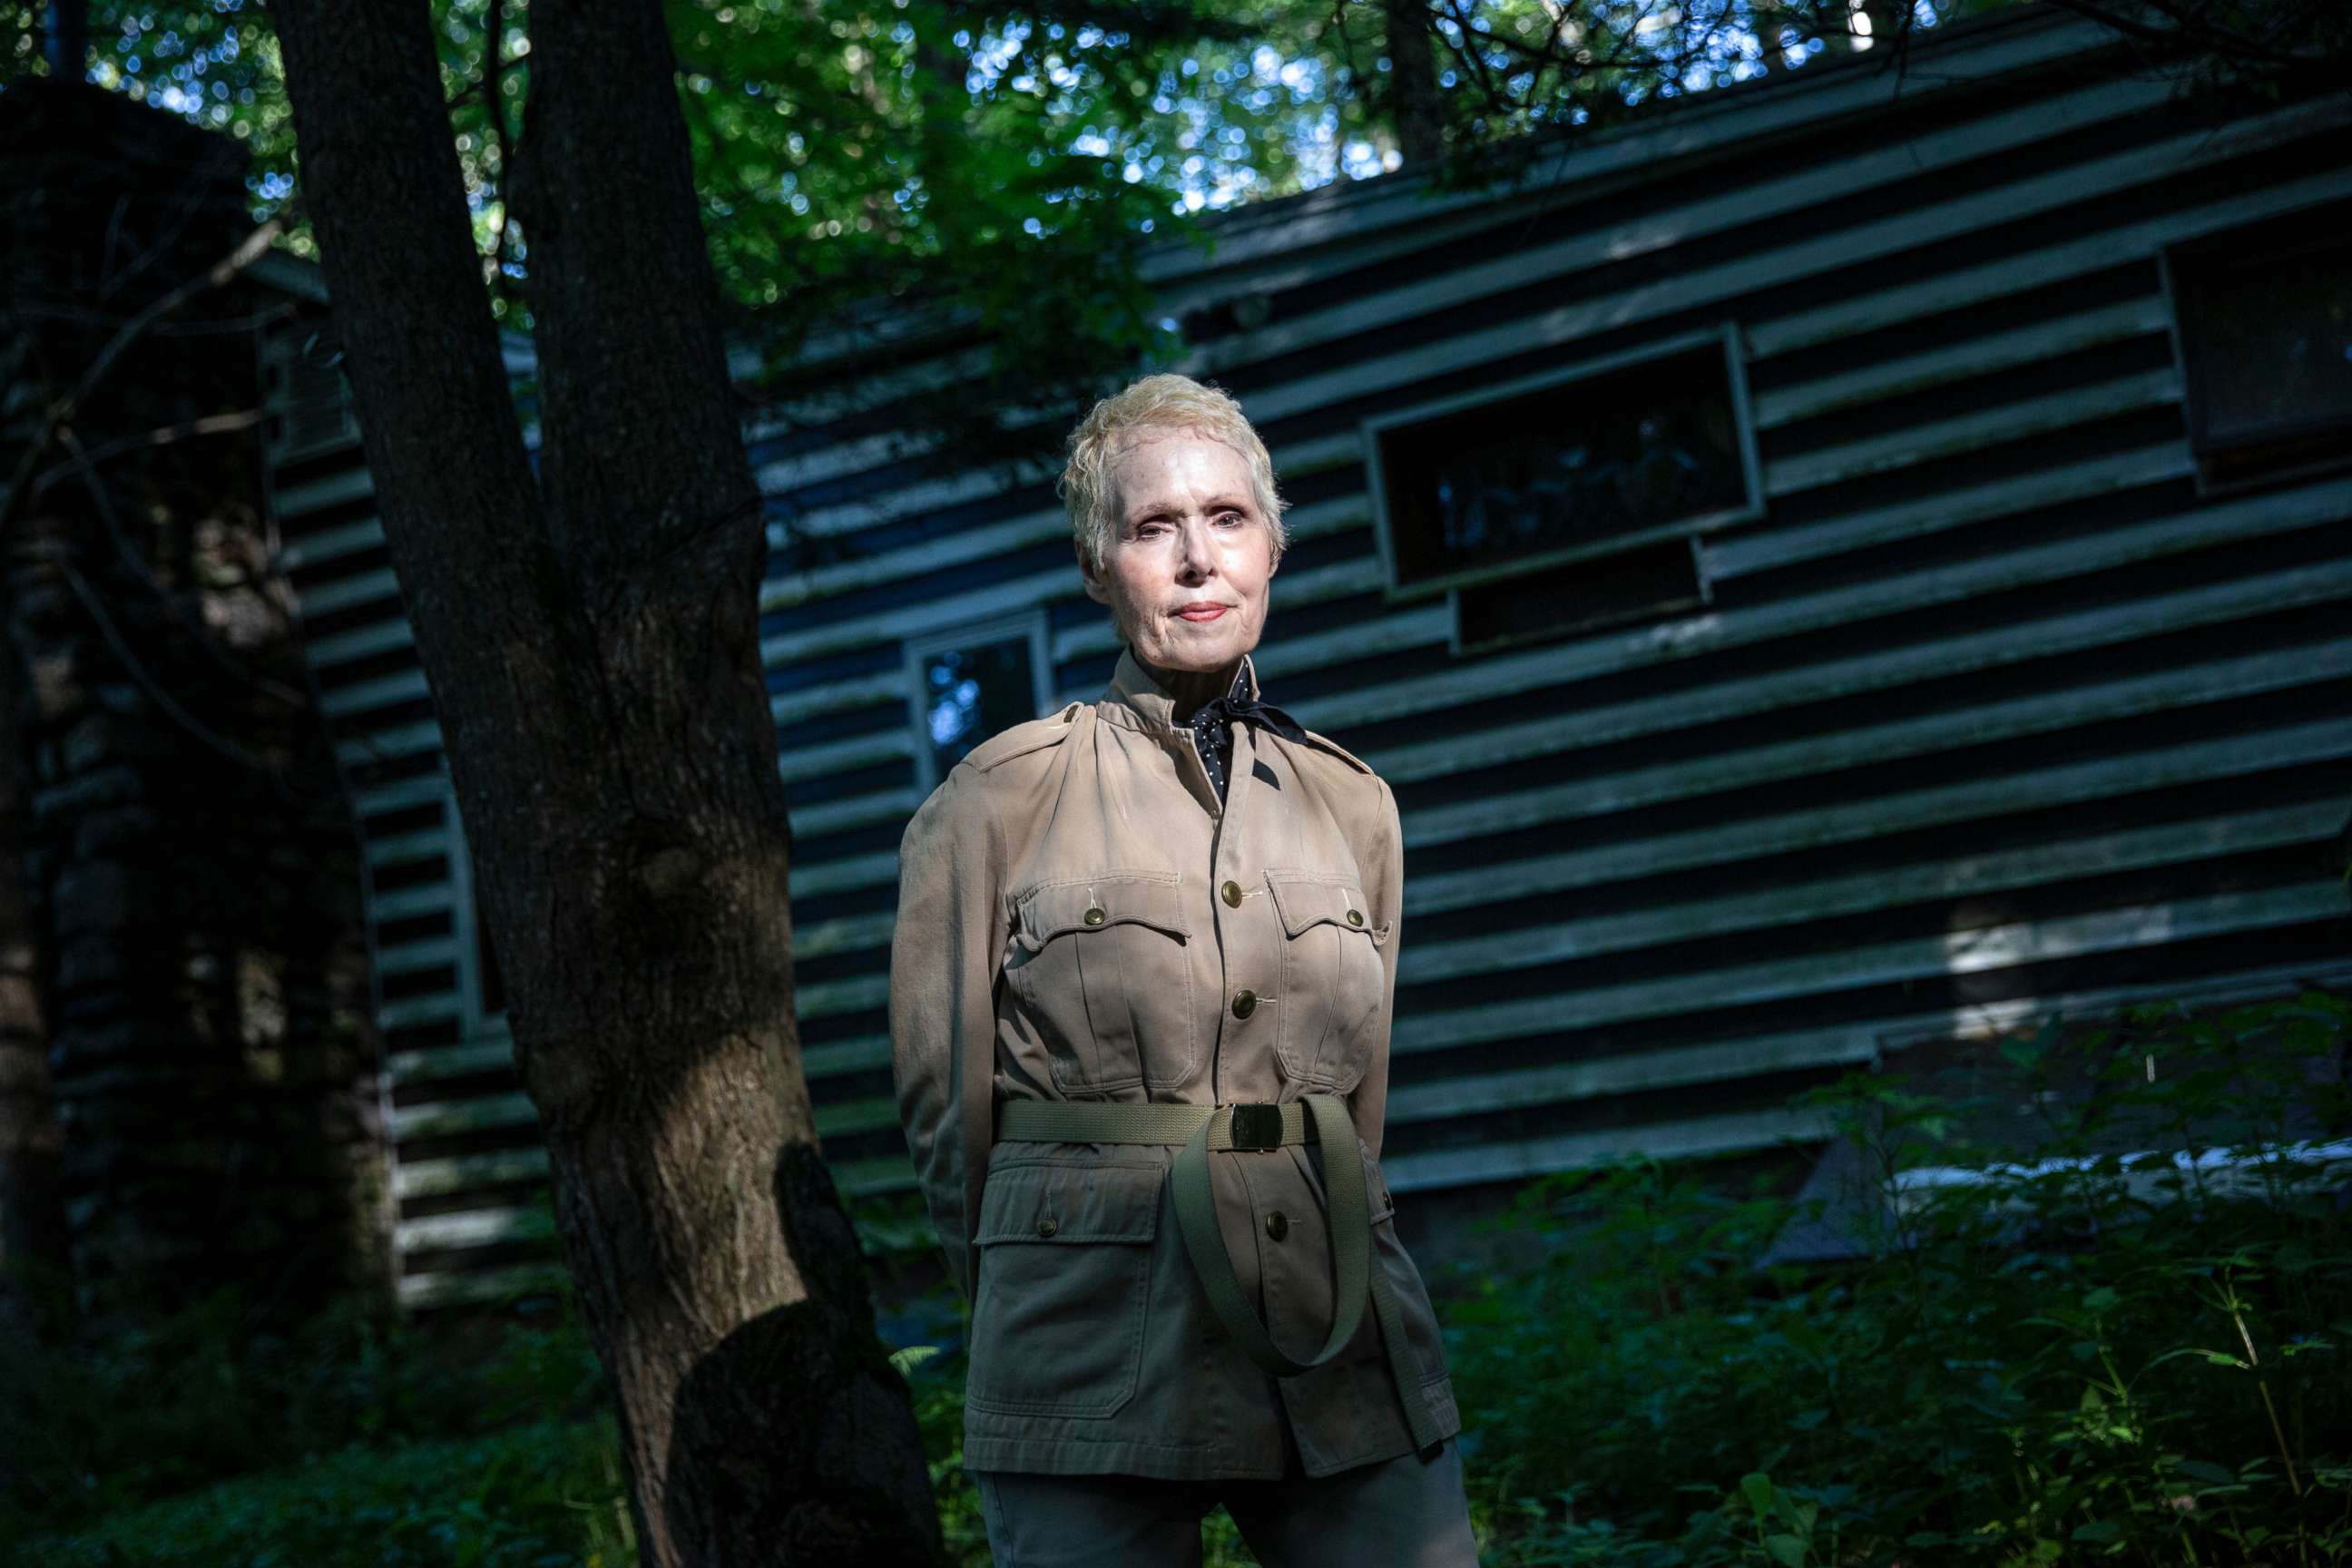 PHOTO: In this June 21, 2019, file photo, E. Jean Carroll is shown at her home in Warwick, N.Y.